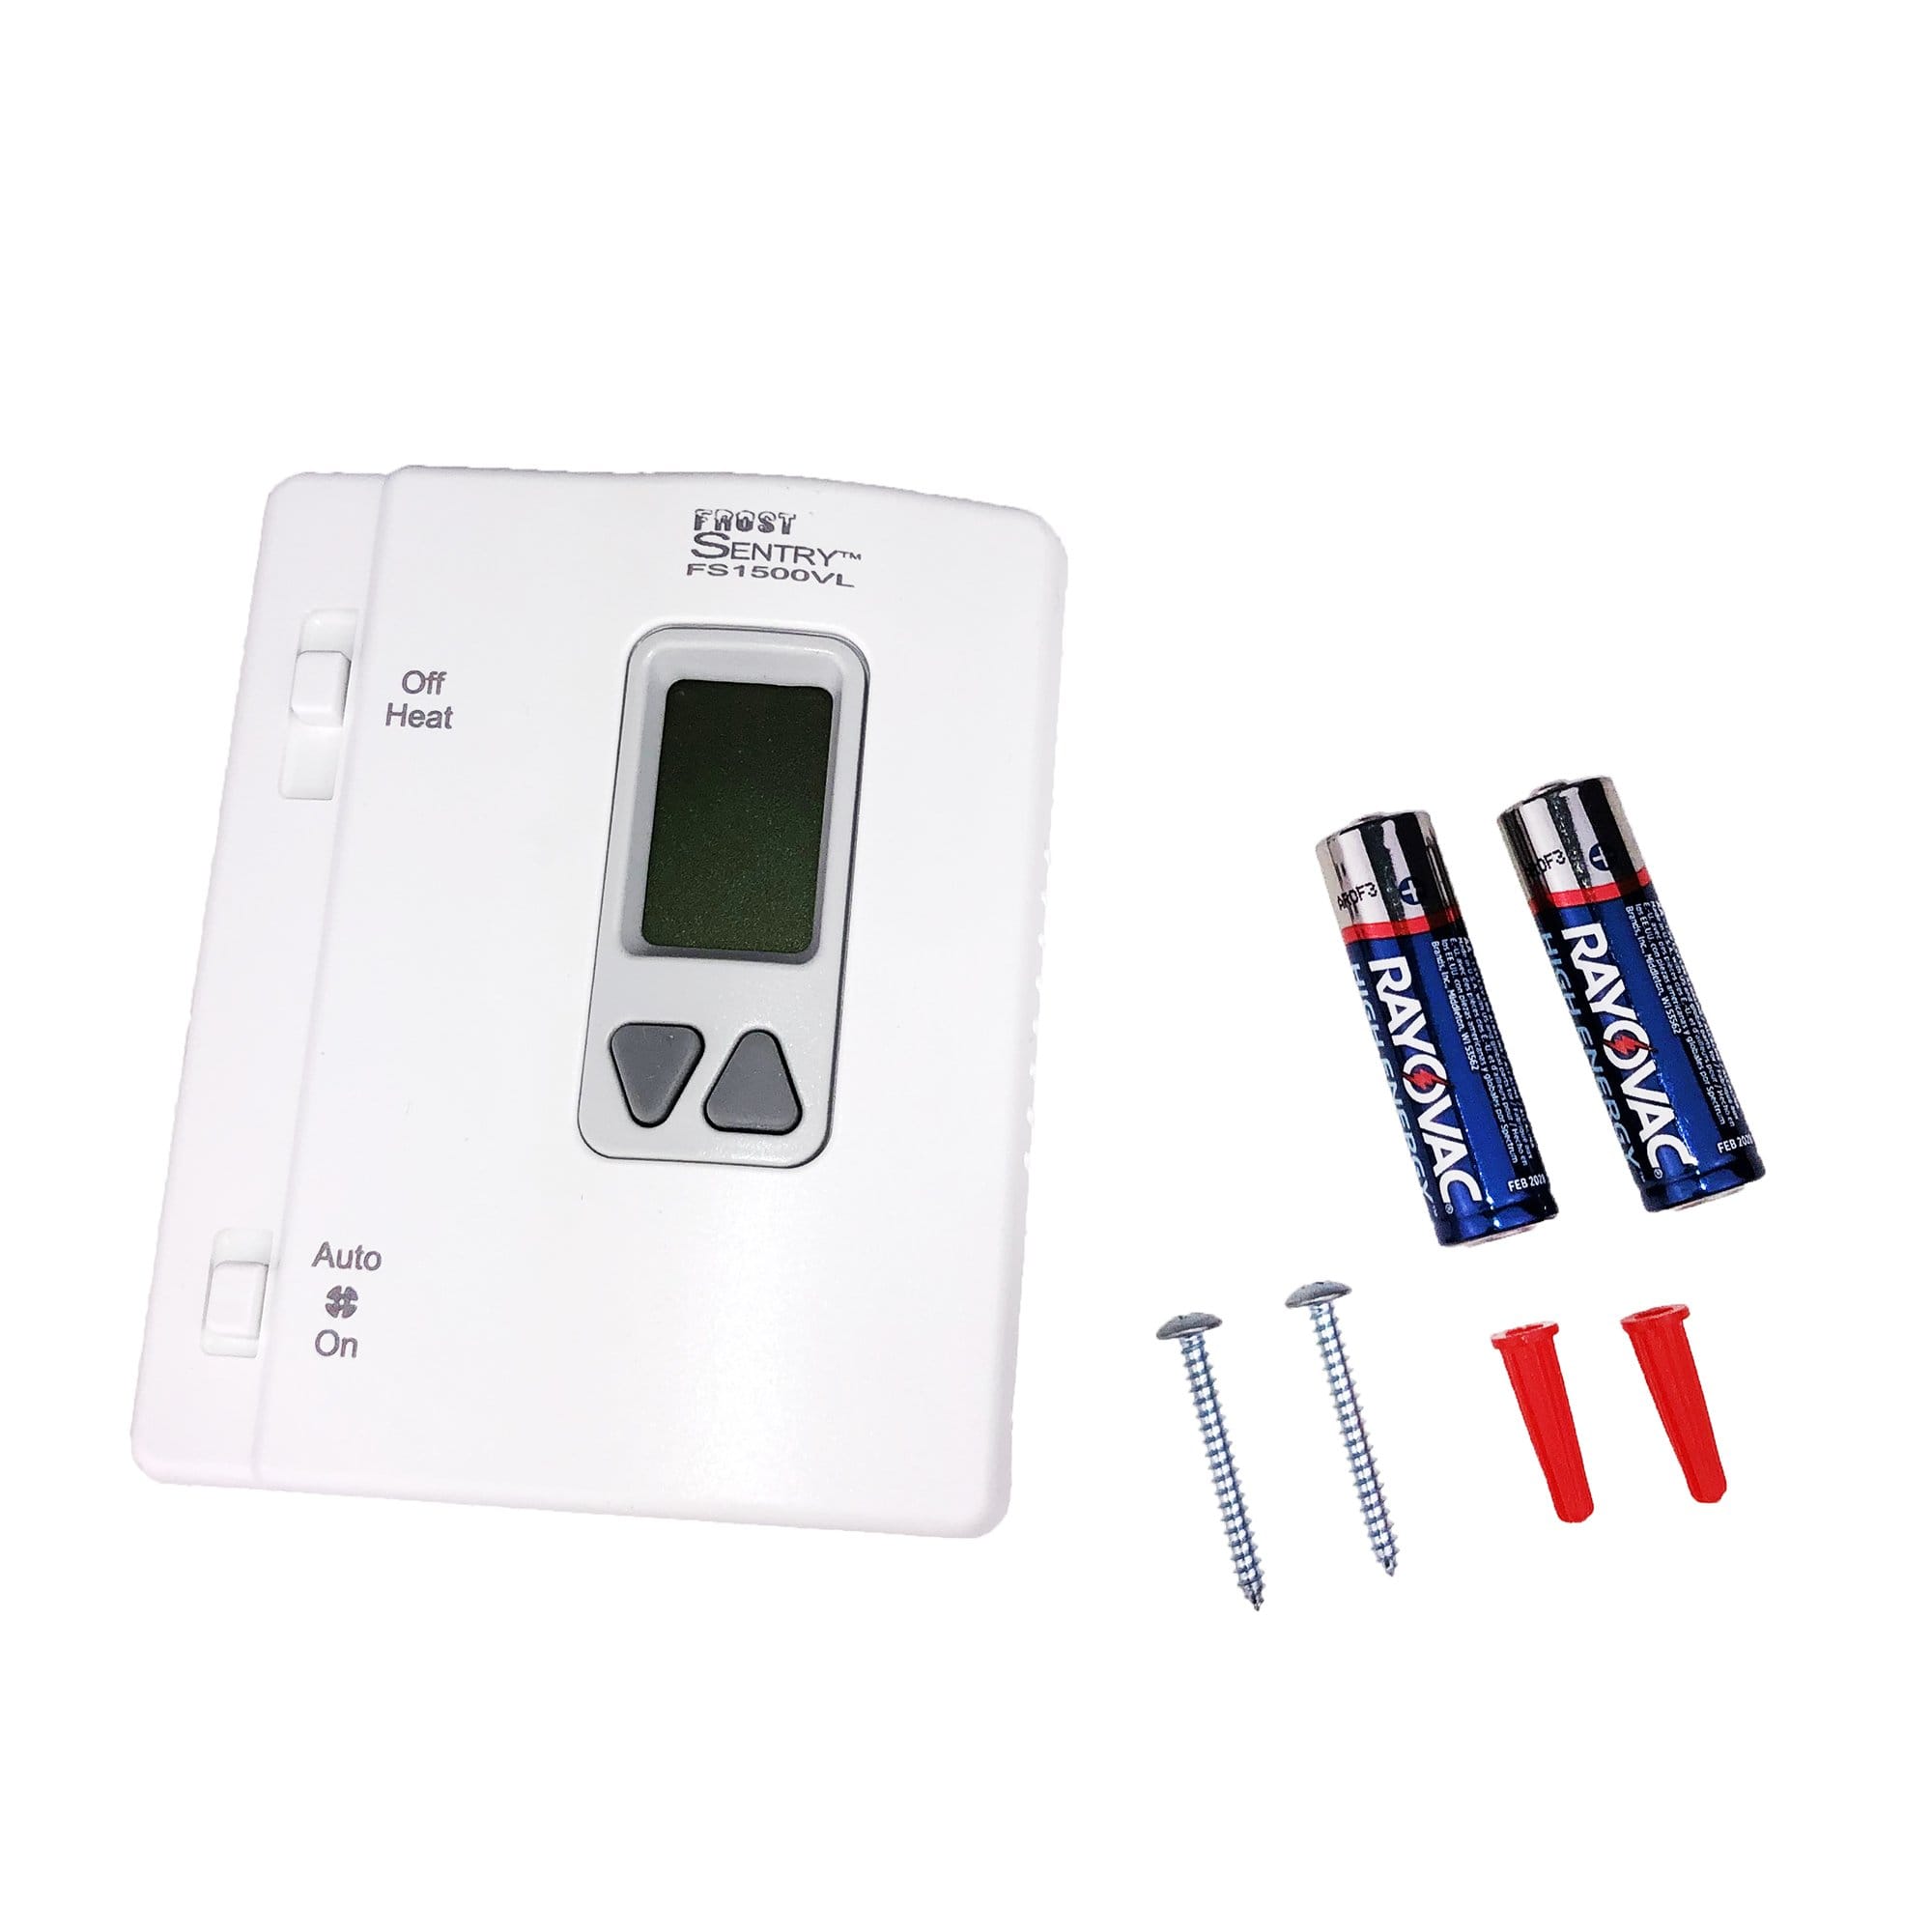 ICM Controls SC1600L Simple Comfort Non Programmable Heat Only Thermostat  Review 